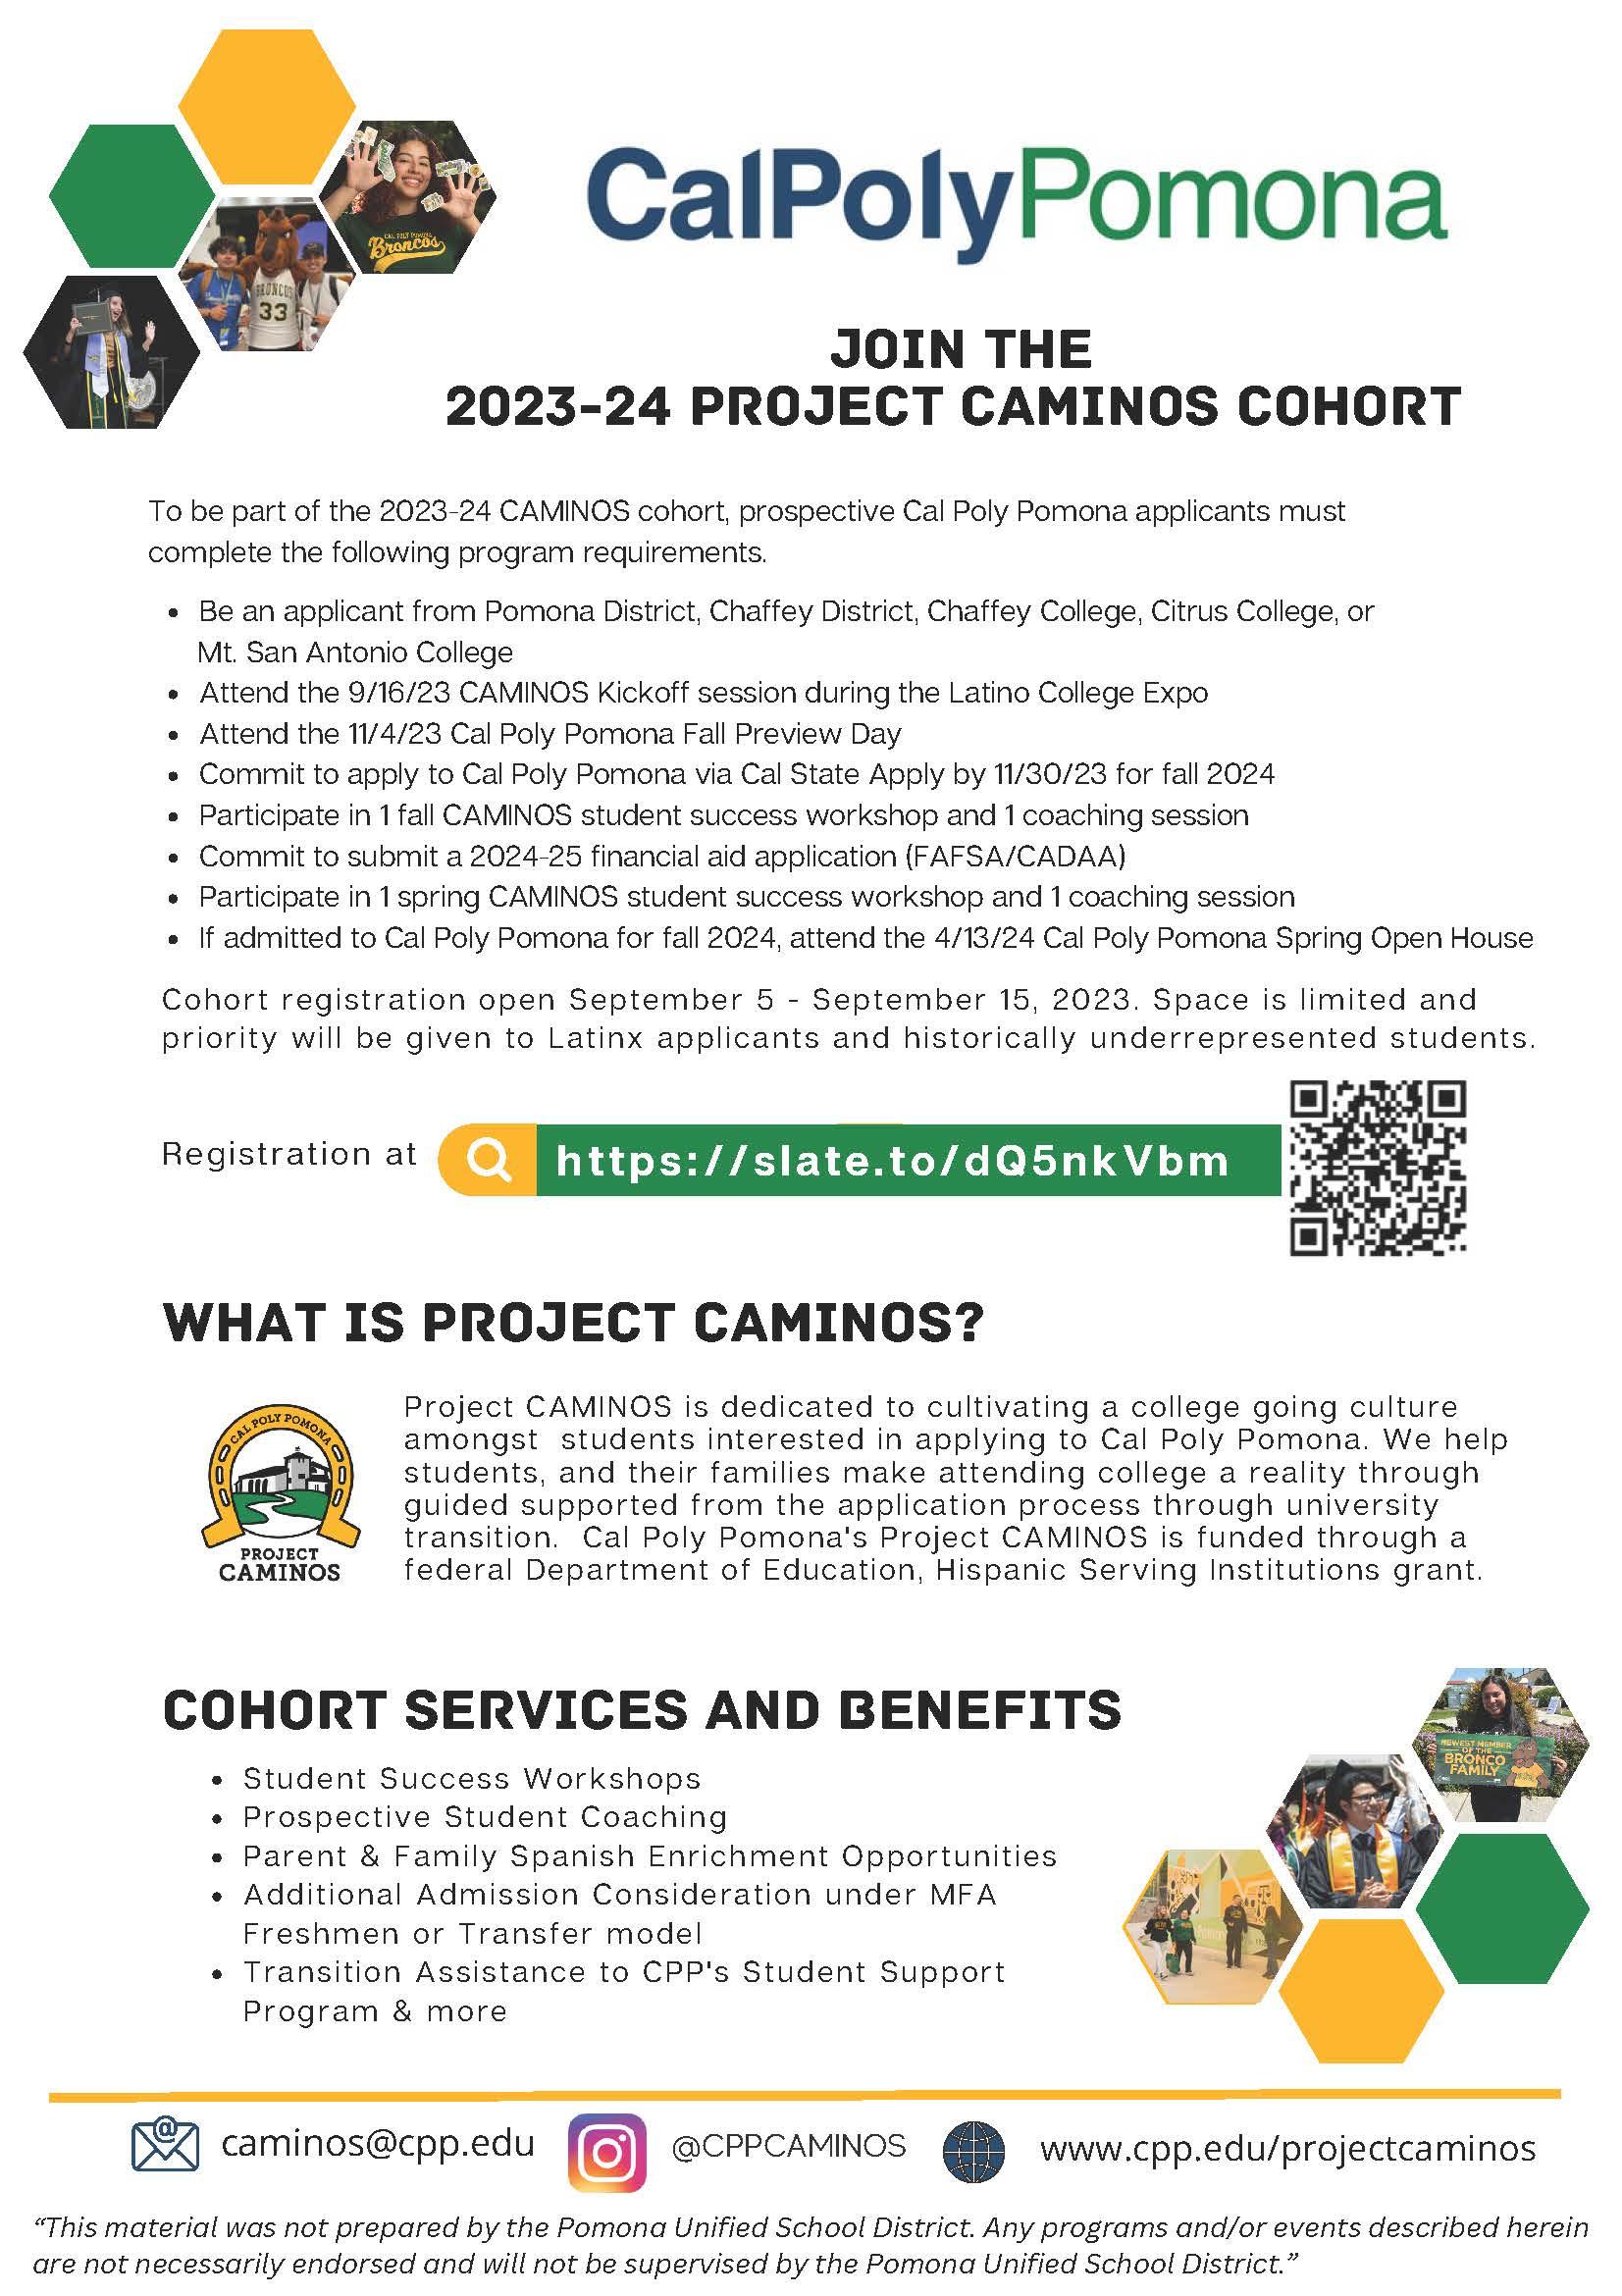 Project Caminos Cohort Flyer for 2023-24